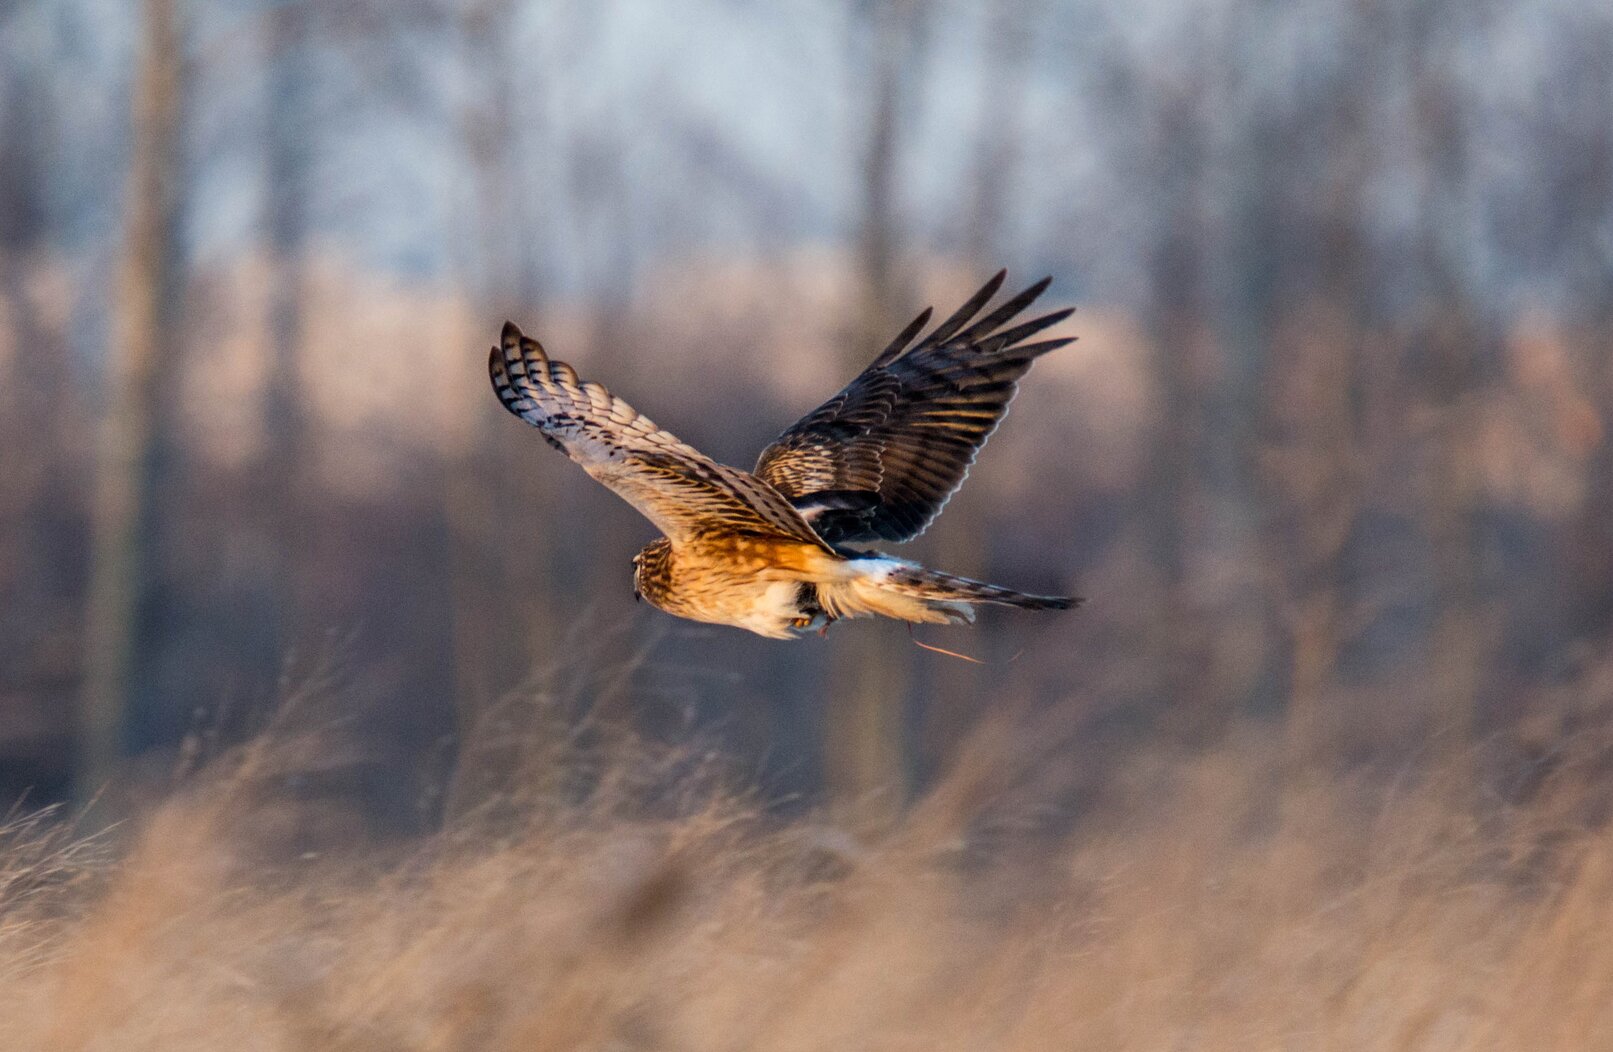 A Northern Harrier carries some sort of long-tailed prey over the grasslands of the Marine Park Preserve. Photo: Will Pollard/CC BY-ND 2.0